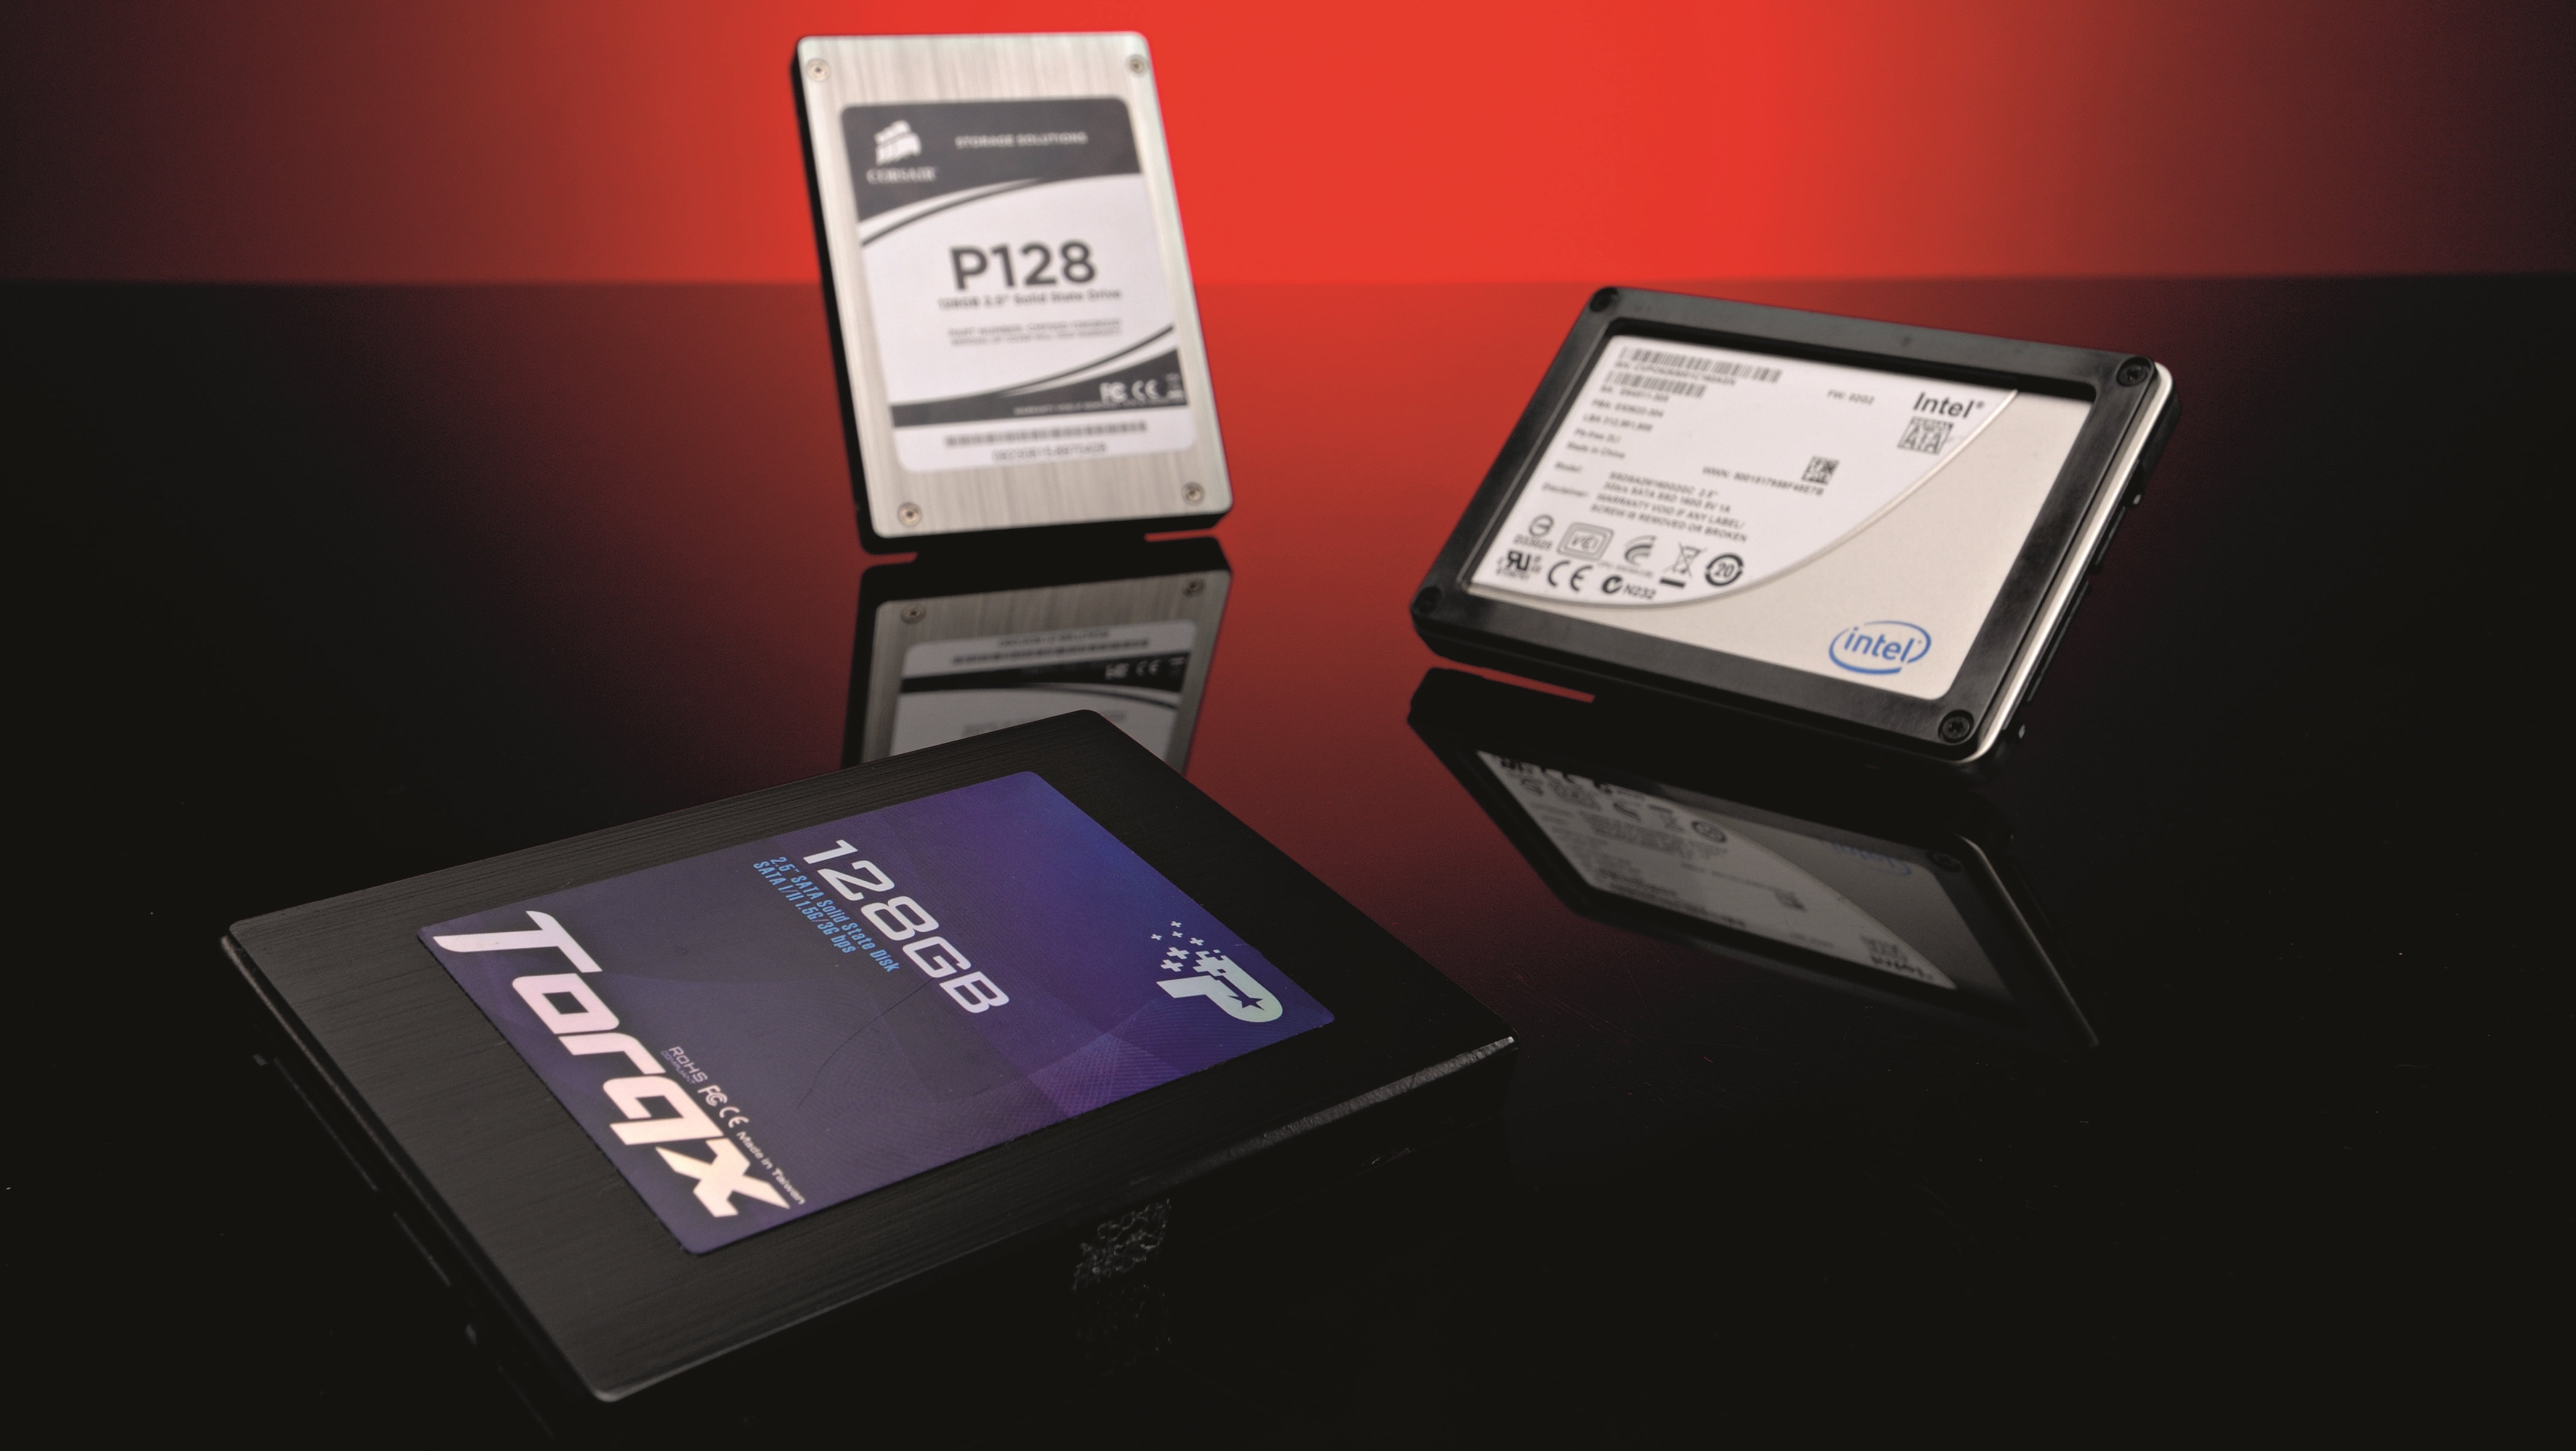 Solid State Drives (SSDs) offer faster ways to store data